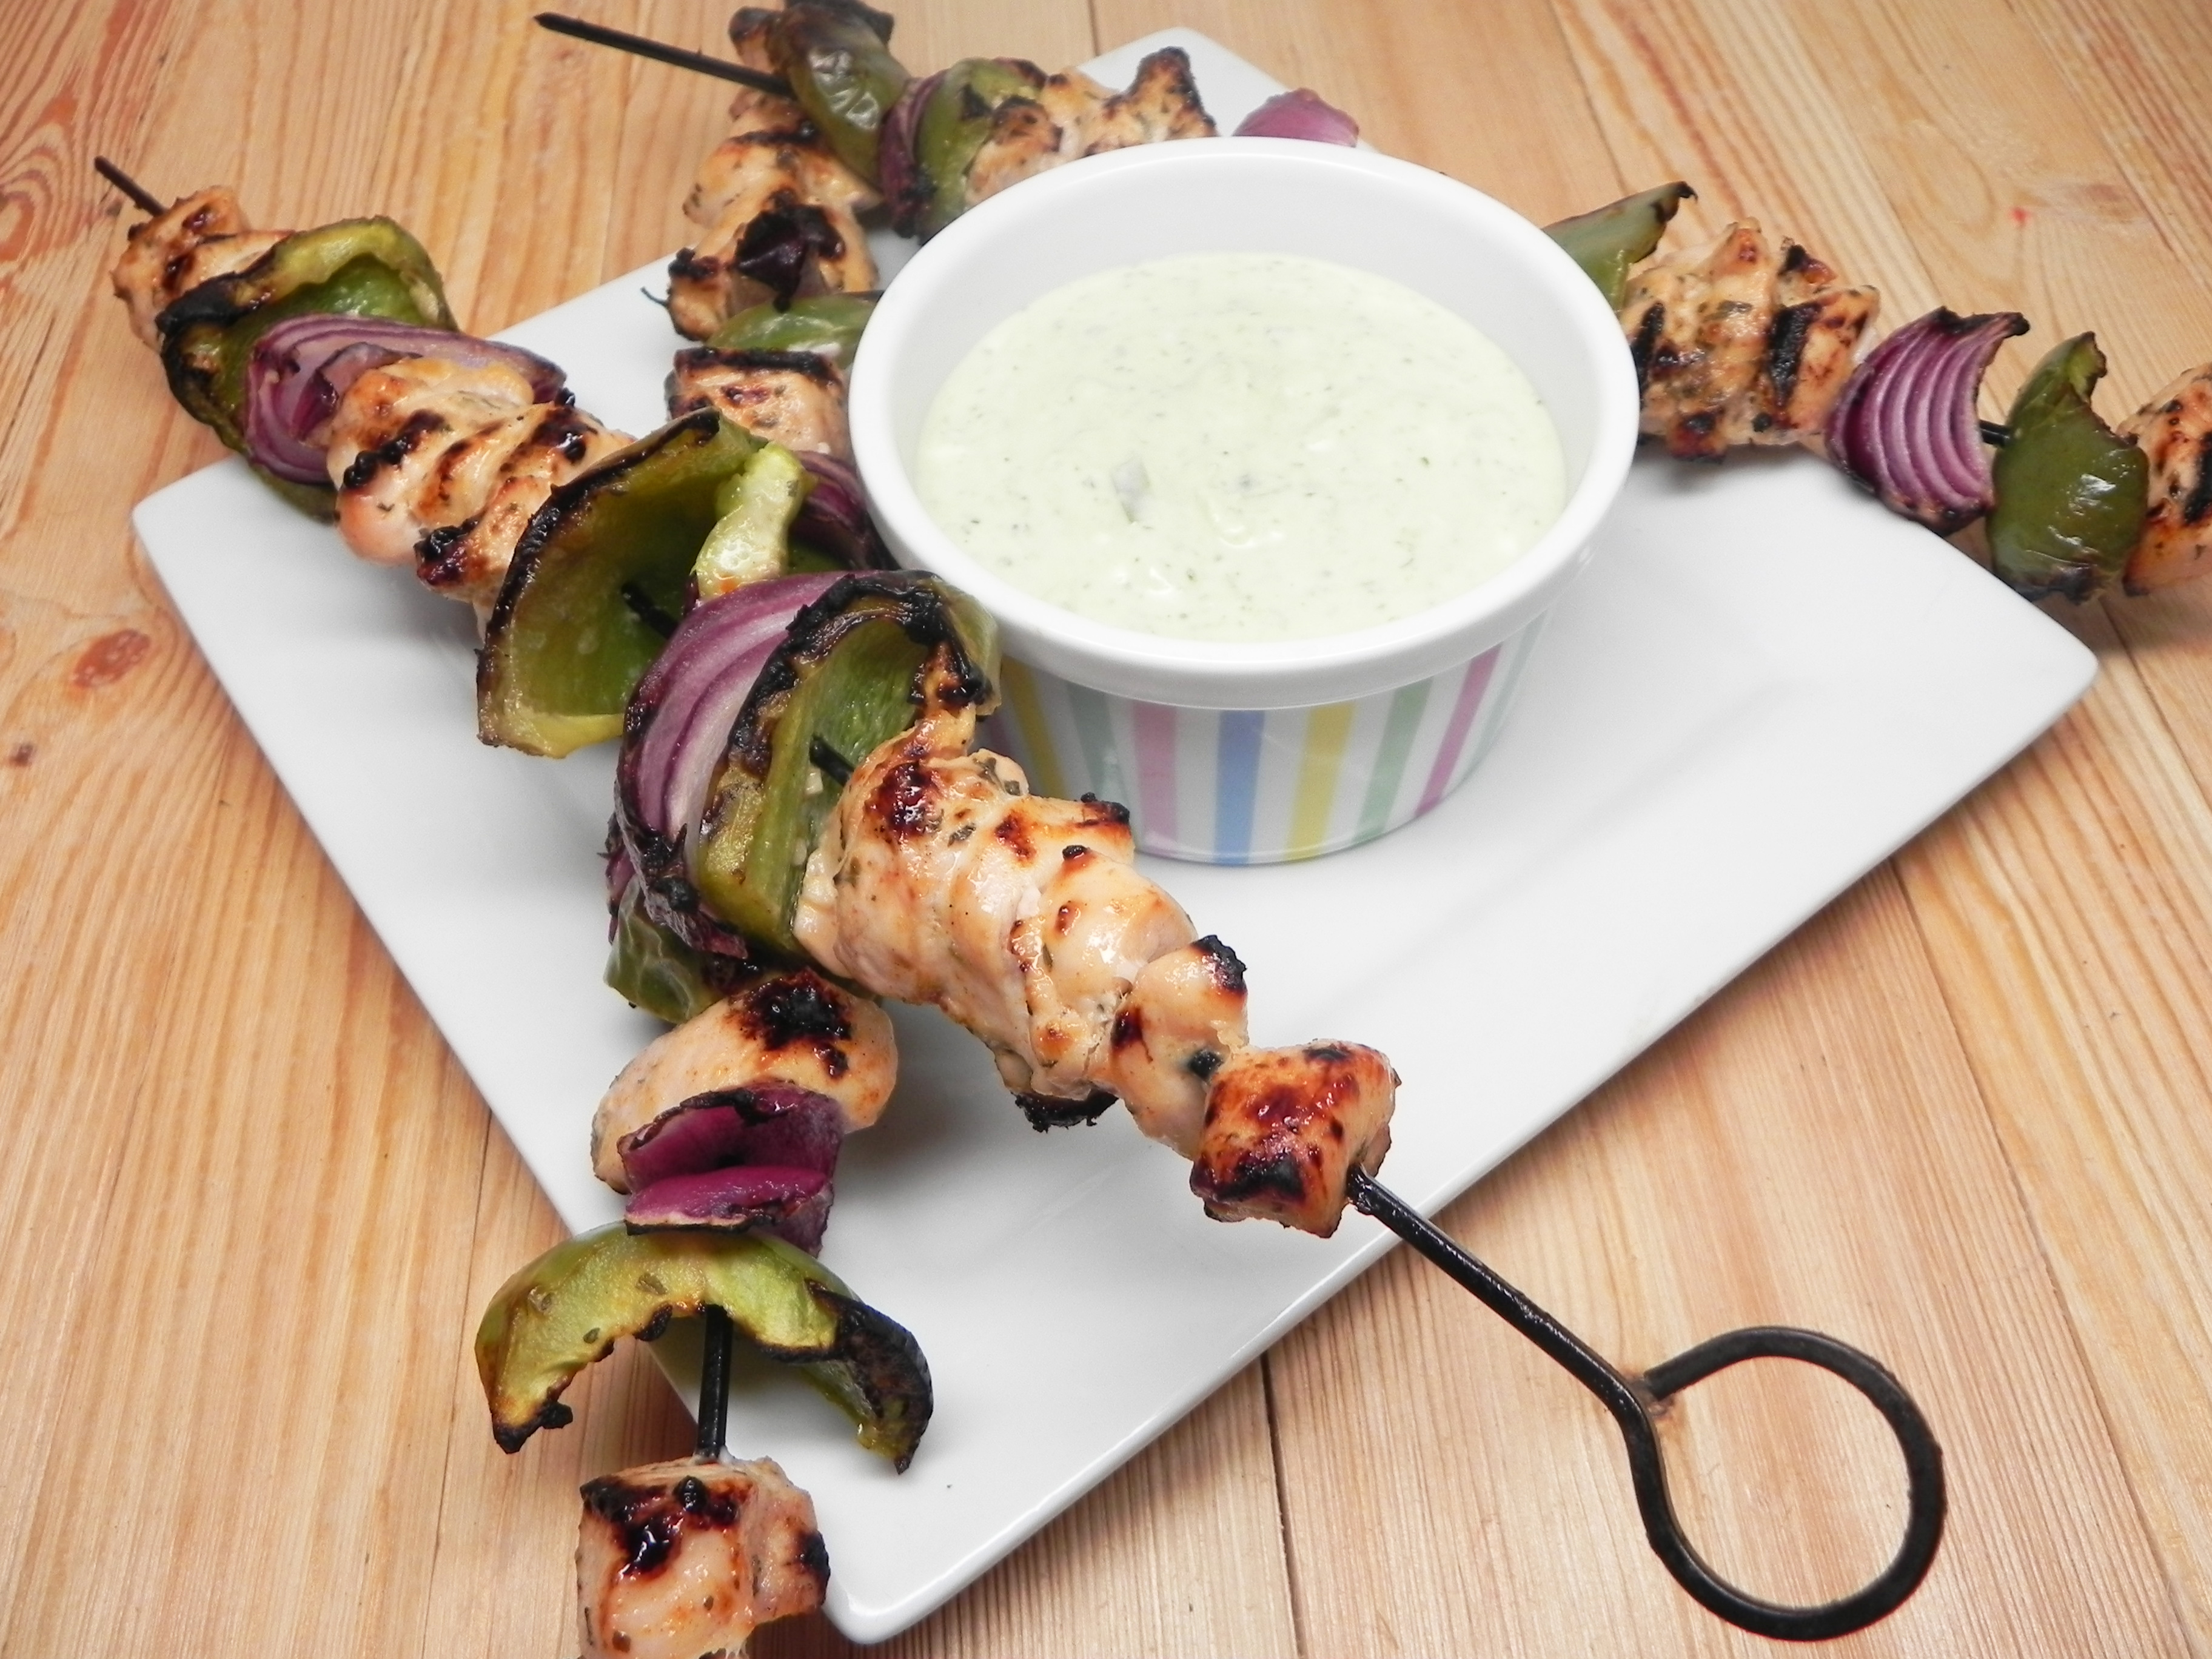 Moroccan-Spiced Chicken Skewers